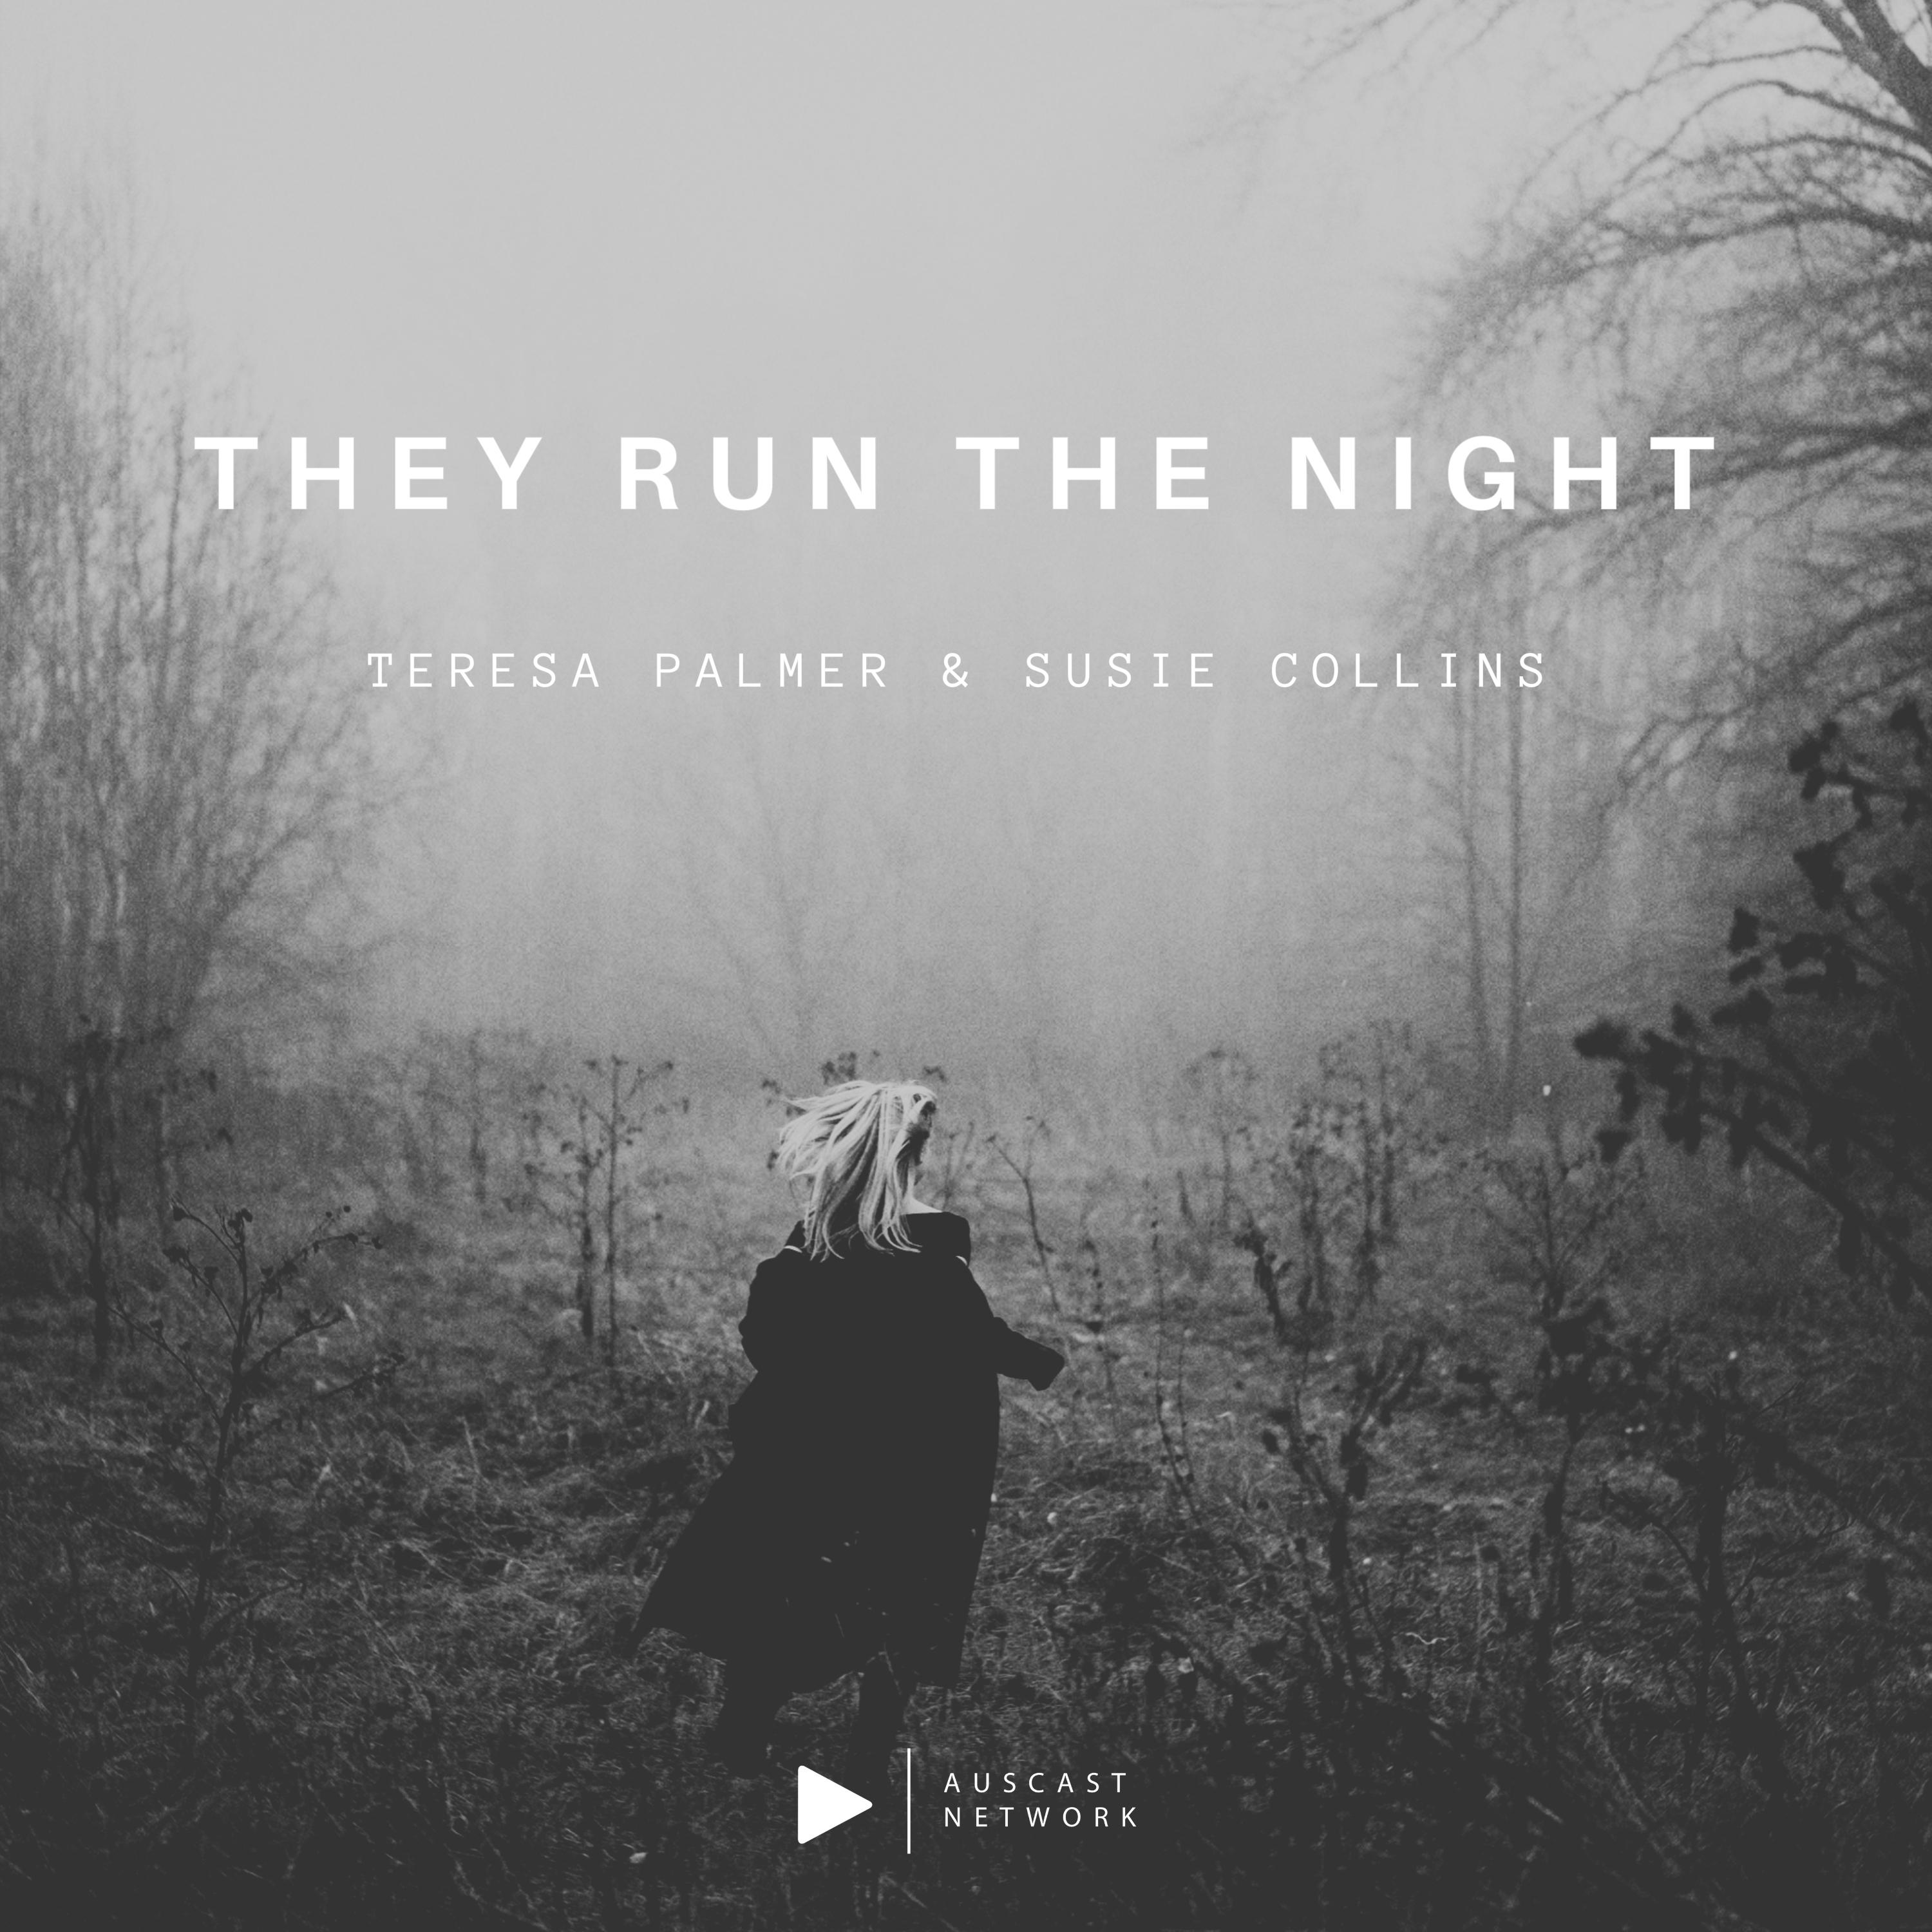 Subscribe now - 'They Run the Night' is coming soon